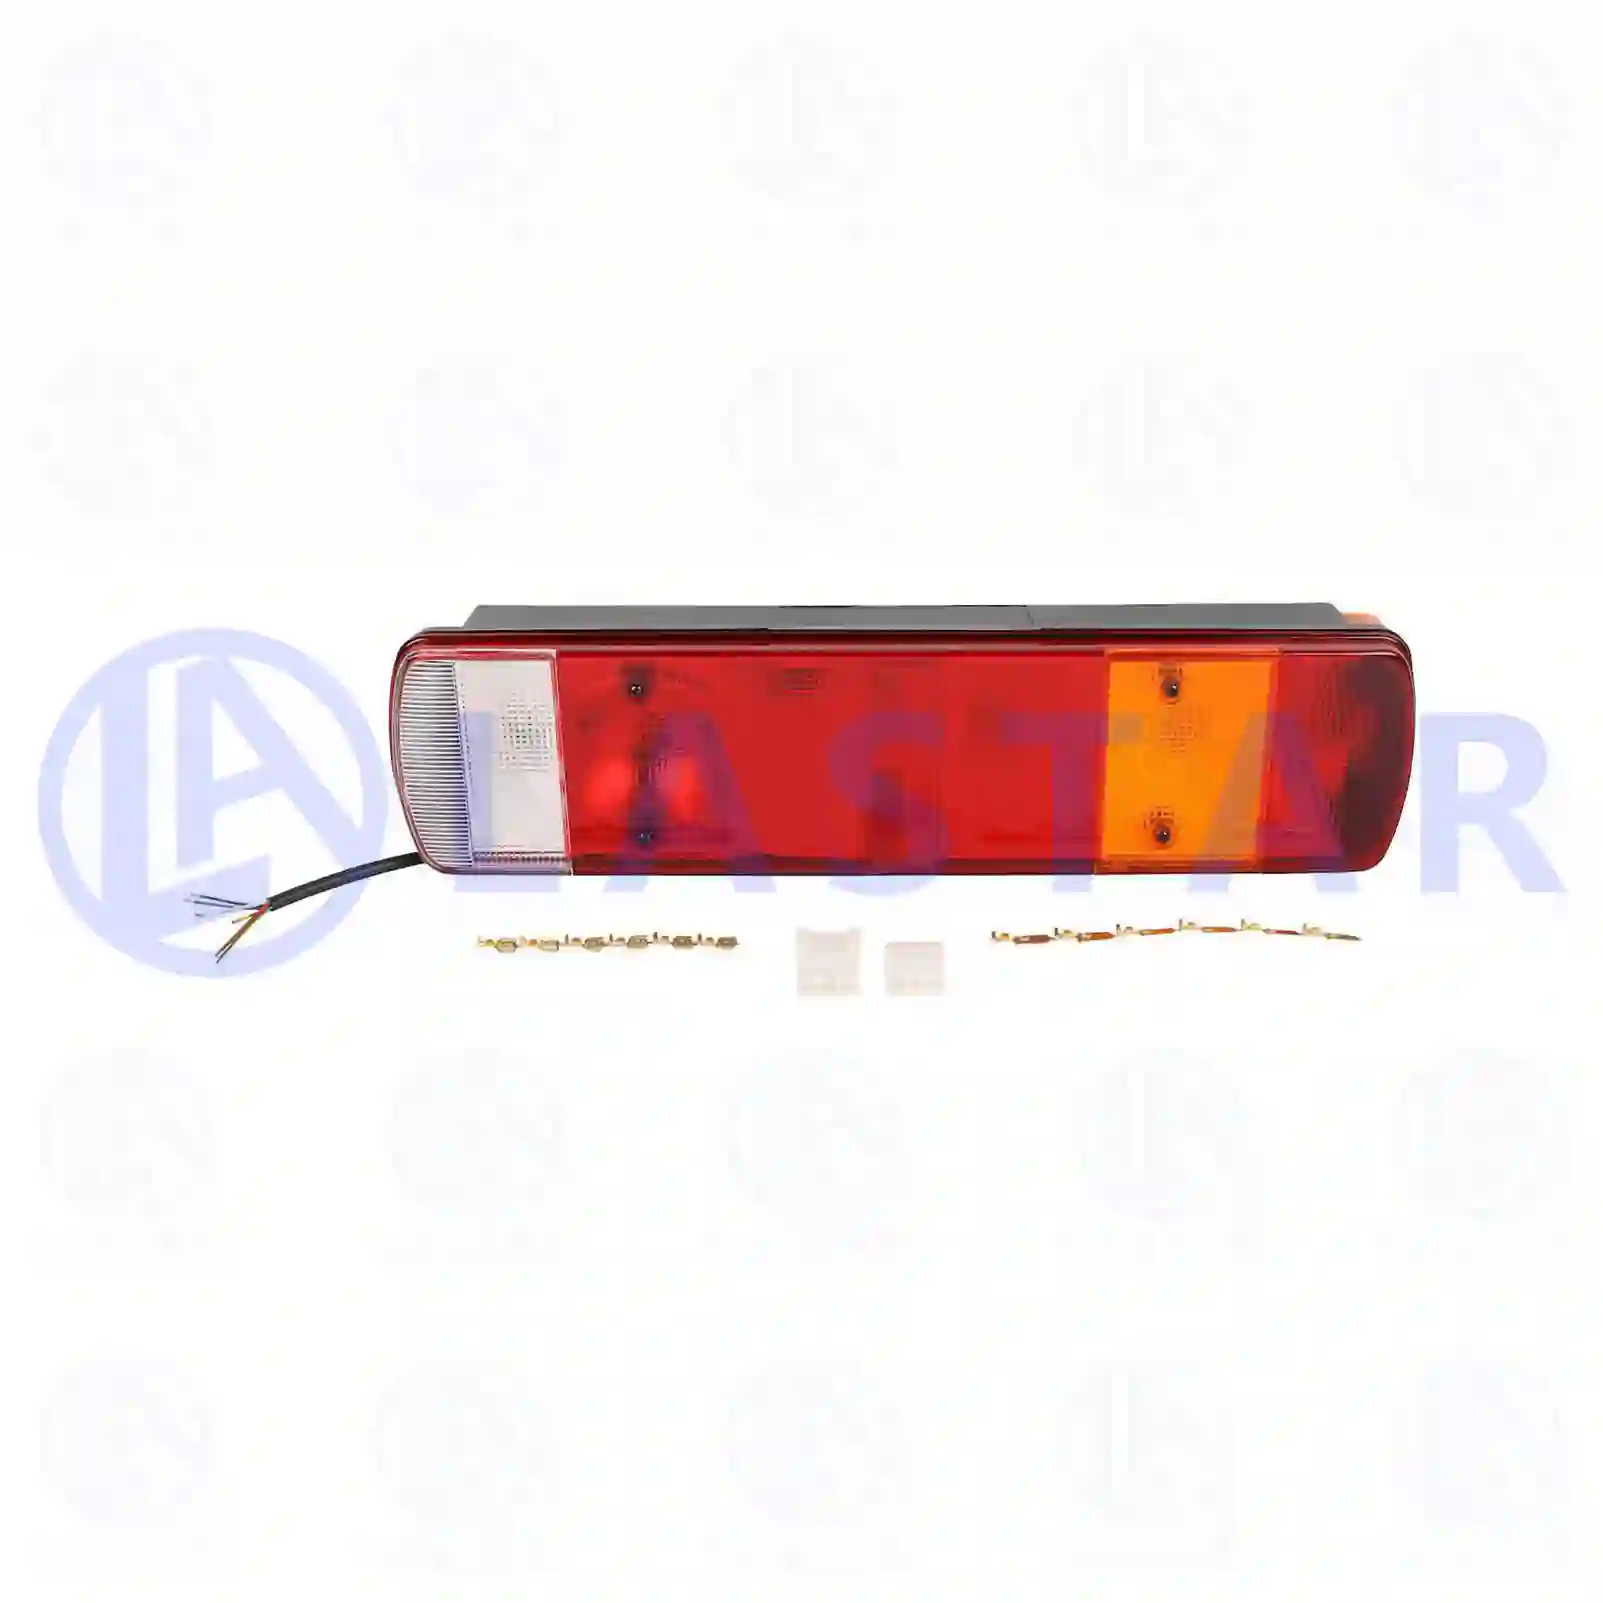 Tail lamp, right, 77711240, 867500, 36008, 1371975, 1371977, 1371979, 1371981, 1387878, 1397496, 1414367, 1414369, 1436852, 1436853, 1436866, 1436868, 1504603, 1504606, 1504609, 1508177, 504609 ||  77711240 Lastar Spare Part | Truck Spare Parts, Auotomotive Spare Parts Tail lamp, right, 77711240, 867500, 36008, 1371975, 1371977, 1371979, 1371981, 1387878, 1397496, 1414367, 1414369, 1436852, 1436853, 1436866, 1436868, 1504603, 1504606, 1504609, 1508177, 504609 ||  77711240 Lastar Spare Part | Truck Spare Parts, Auotomotive Spare Parts